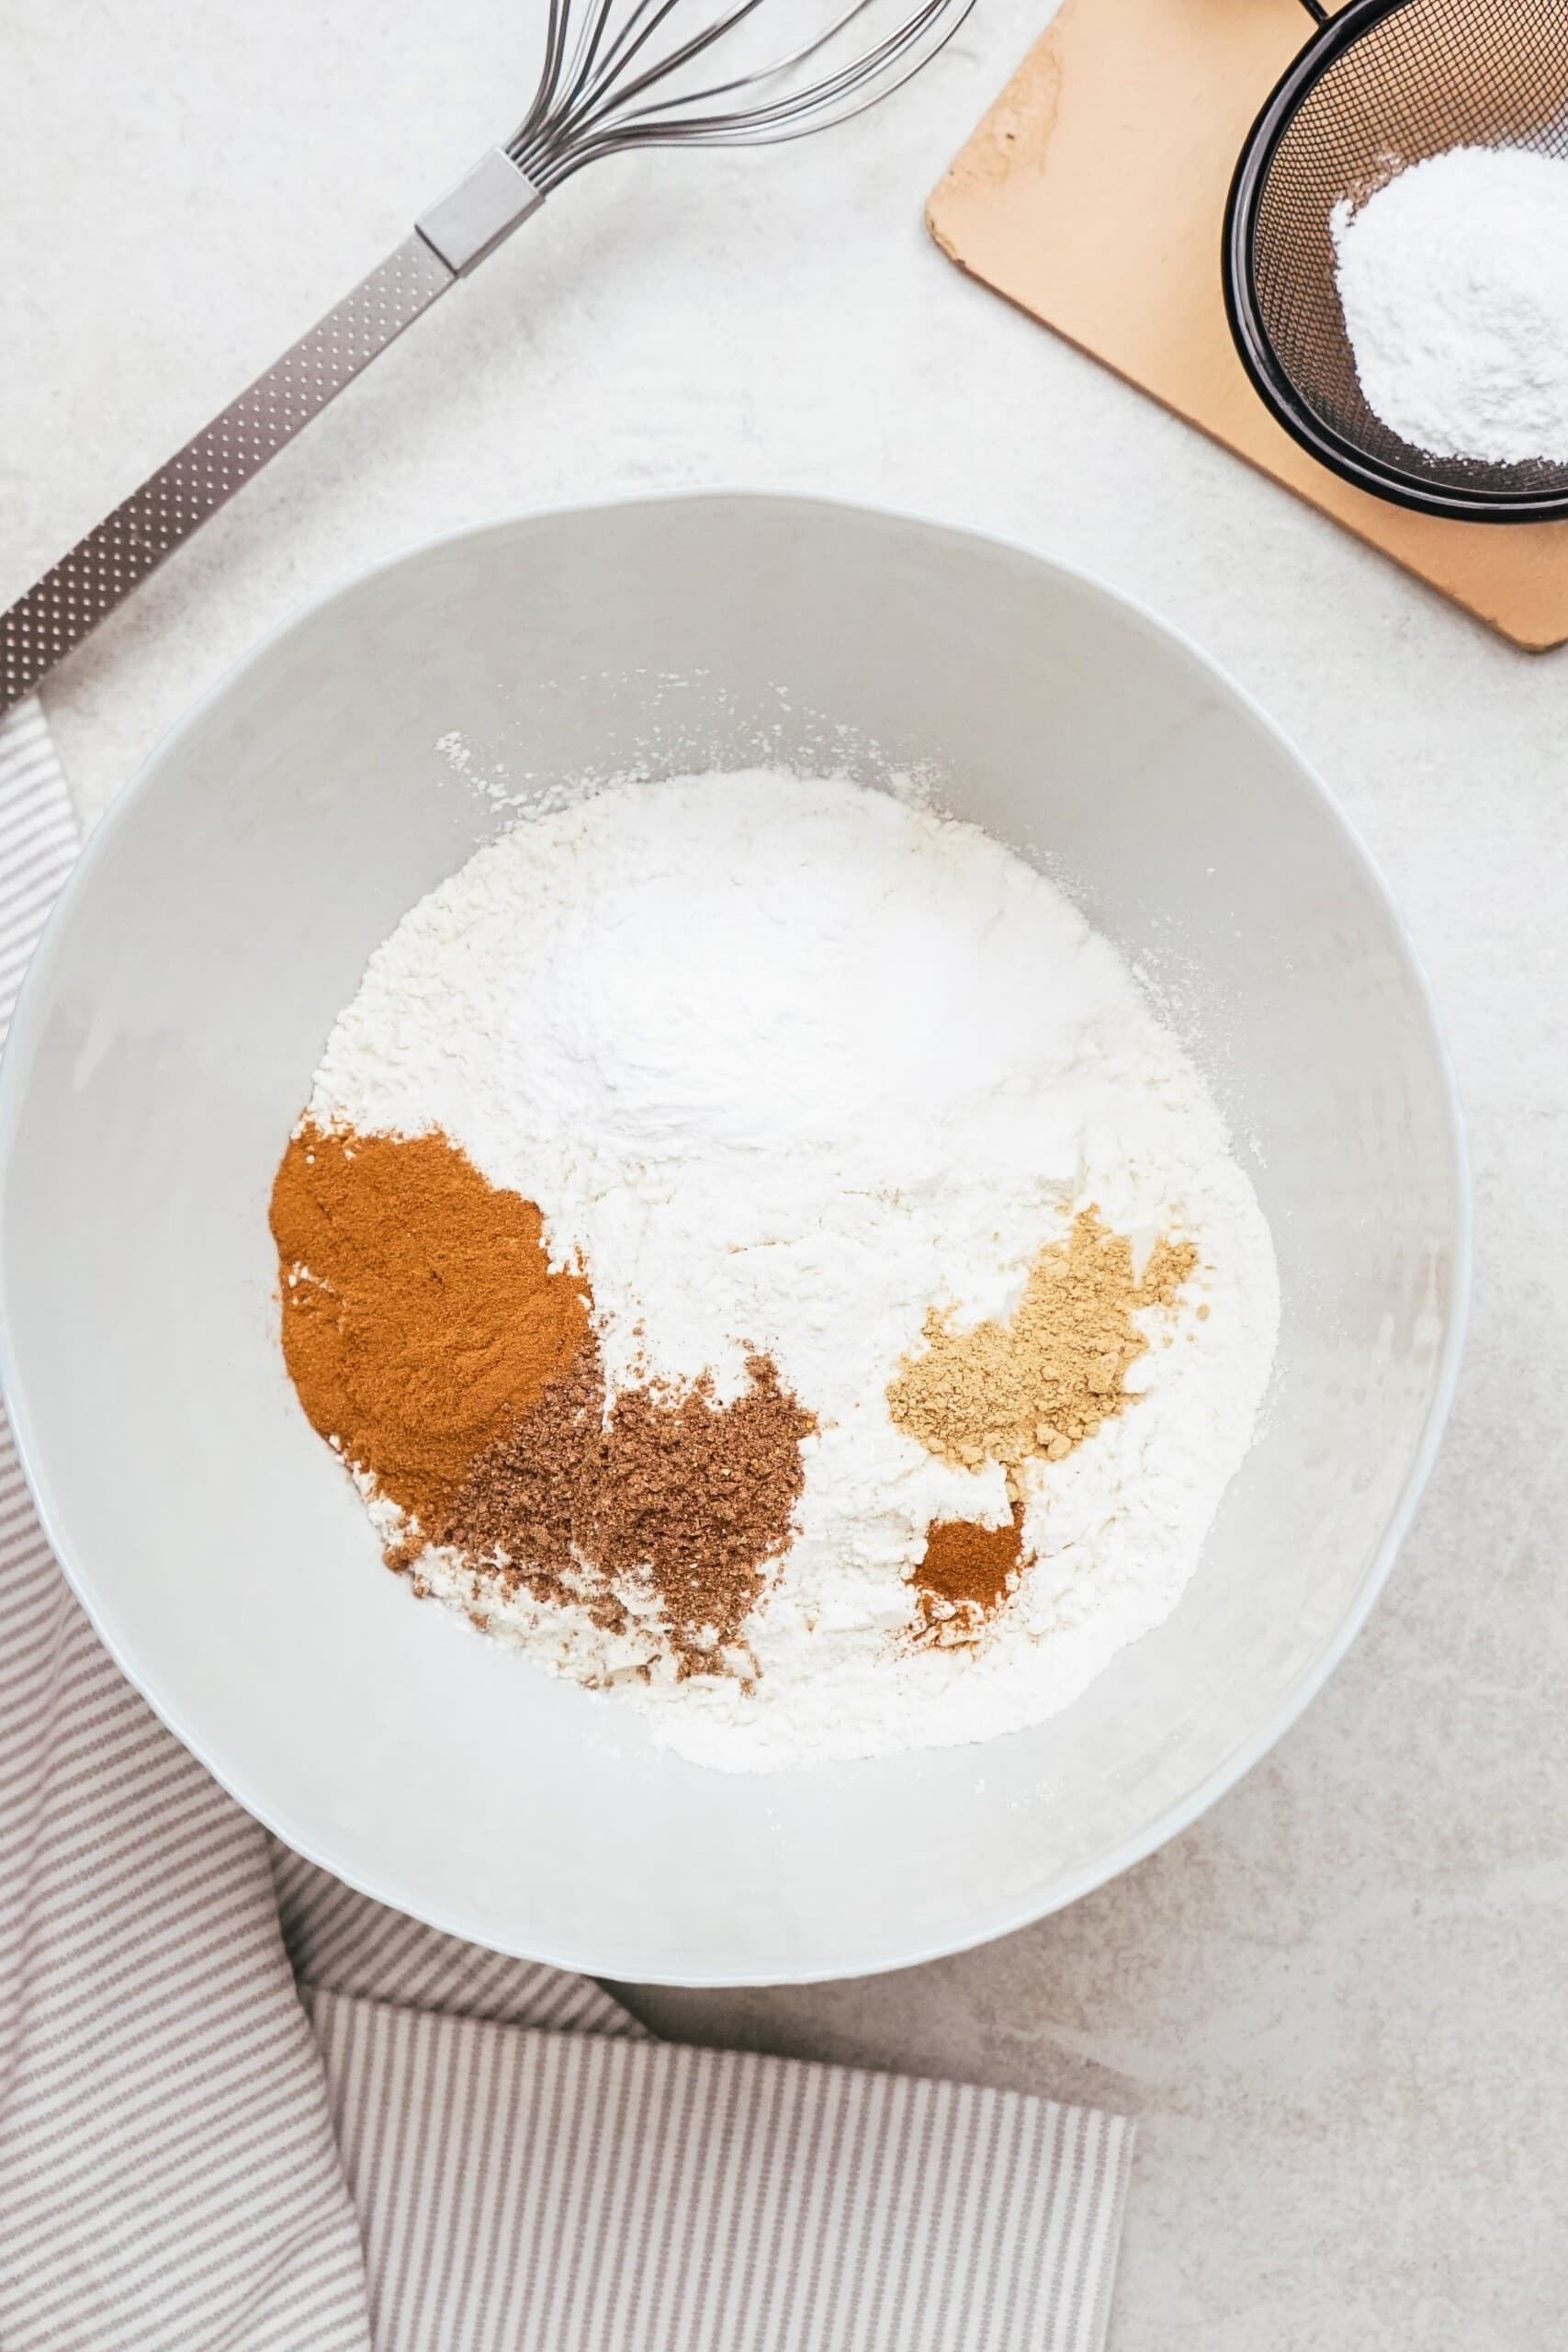 dry ingredients for pumpkin donuts in a mixing bowl